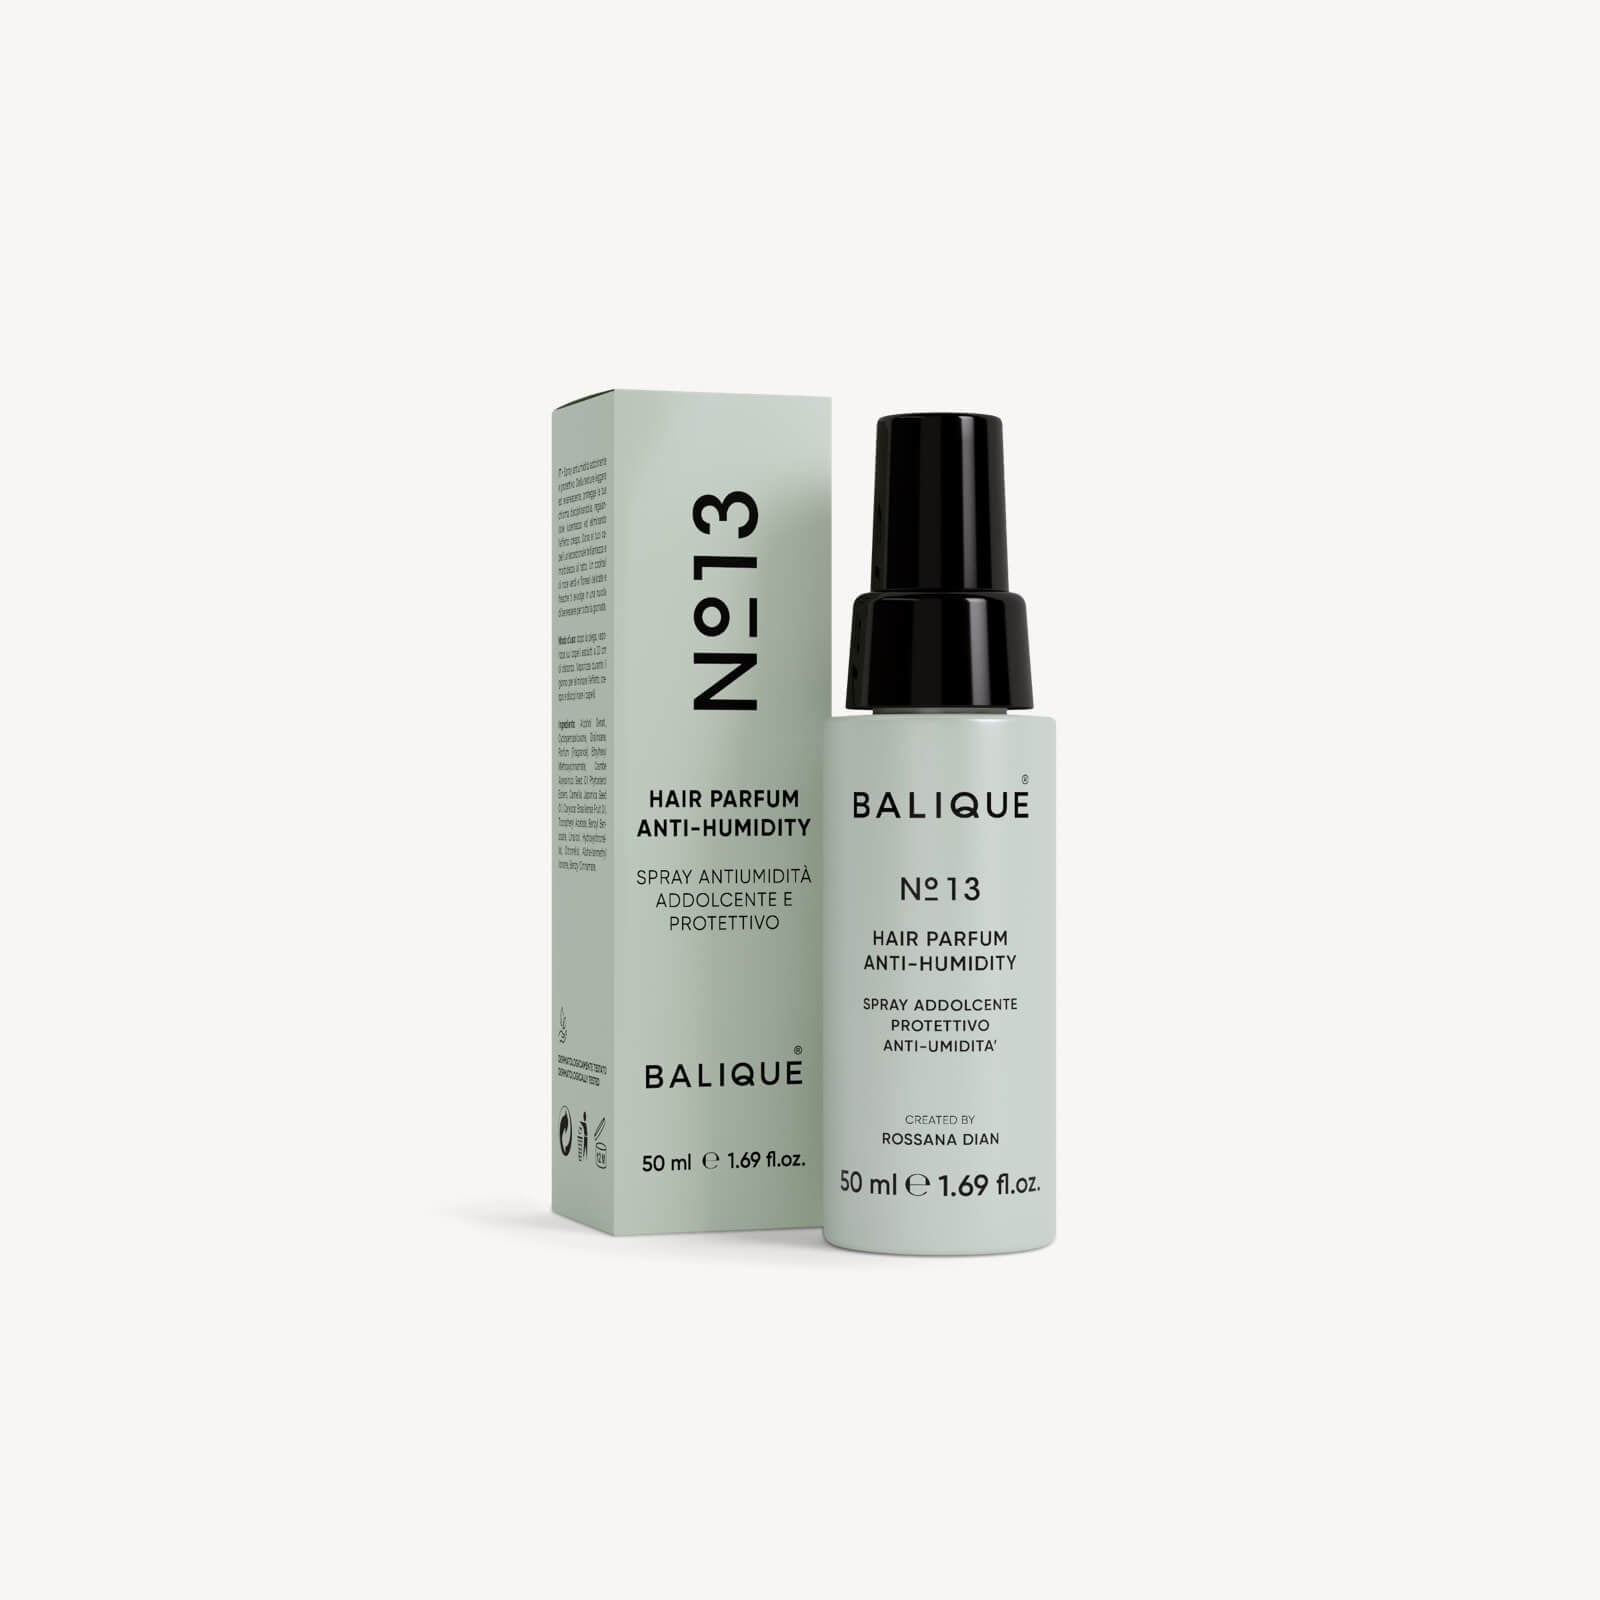 BOX 04 - TRAVEL SIZE - Treated curly hair - Complete treatment 